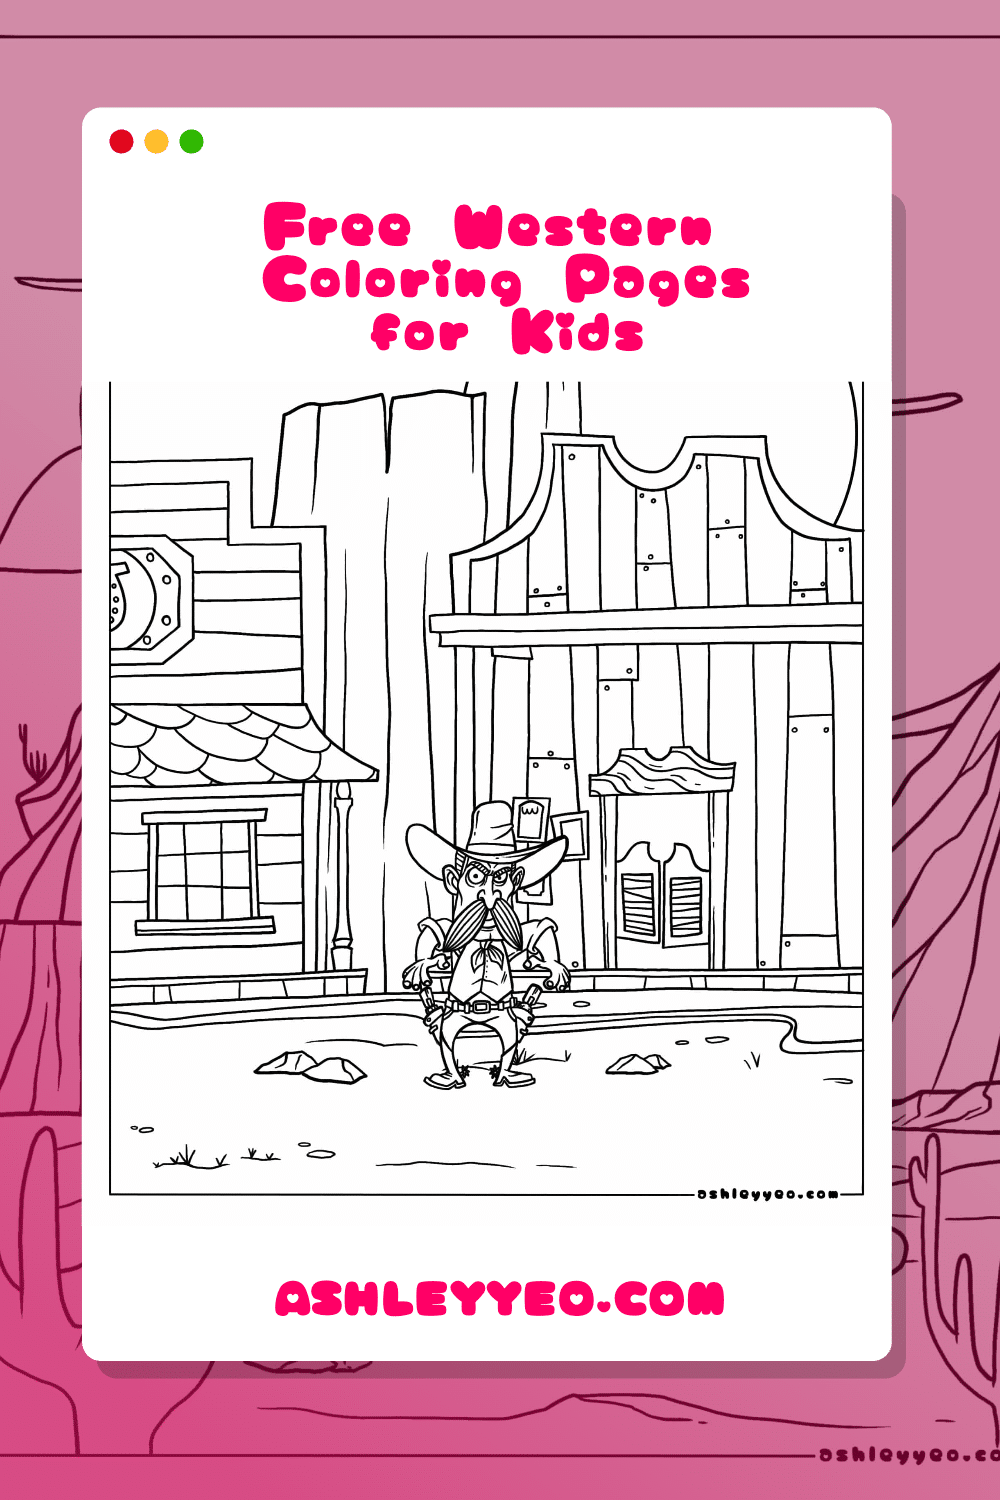 Free western coloring pages for kids